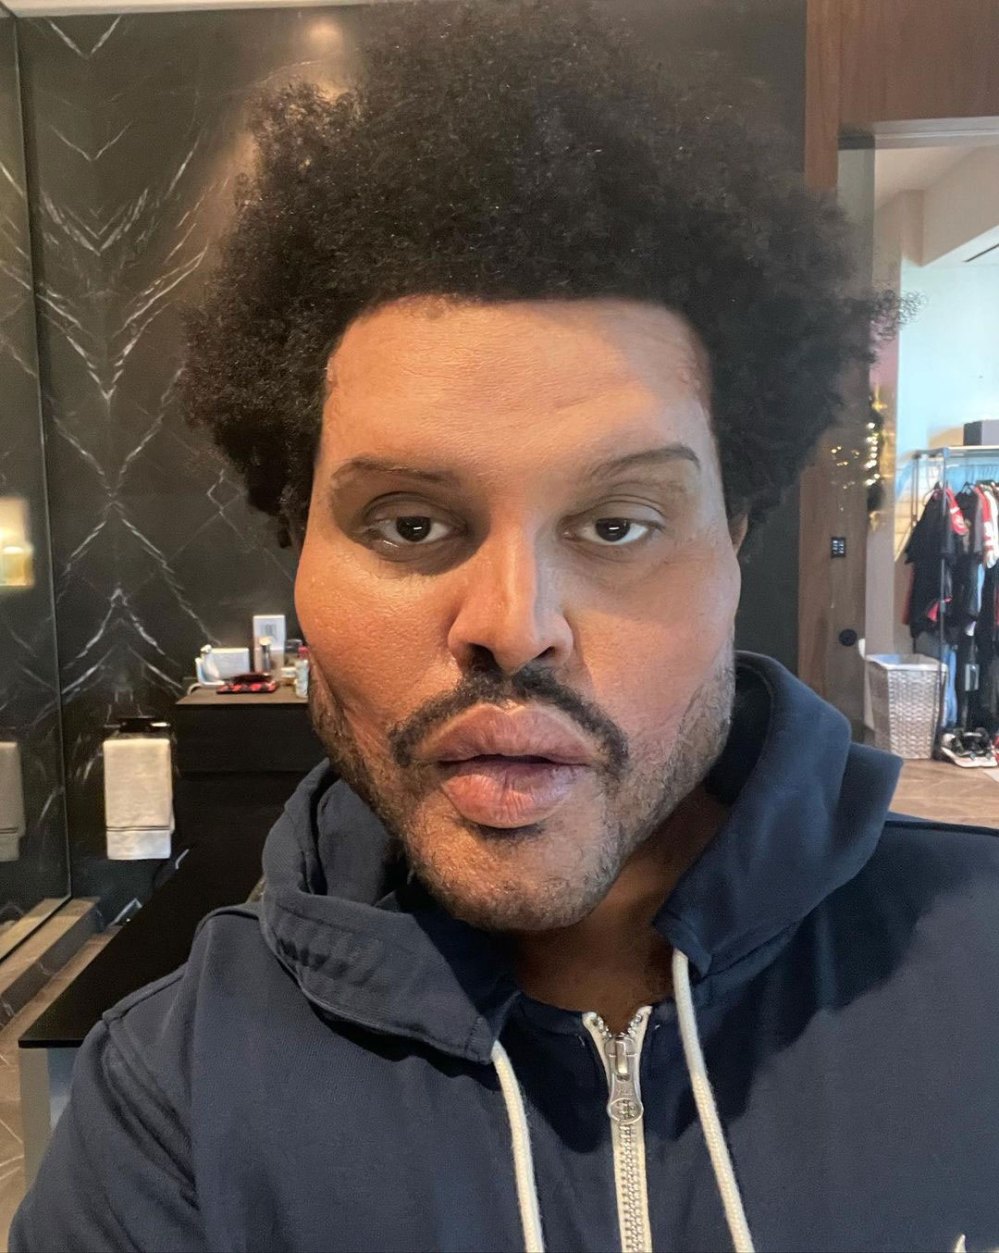 The Weeknd Face Appears Normal After Plastic Surgery Speculation